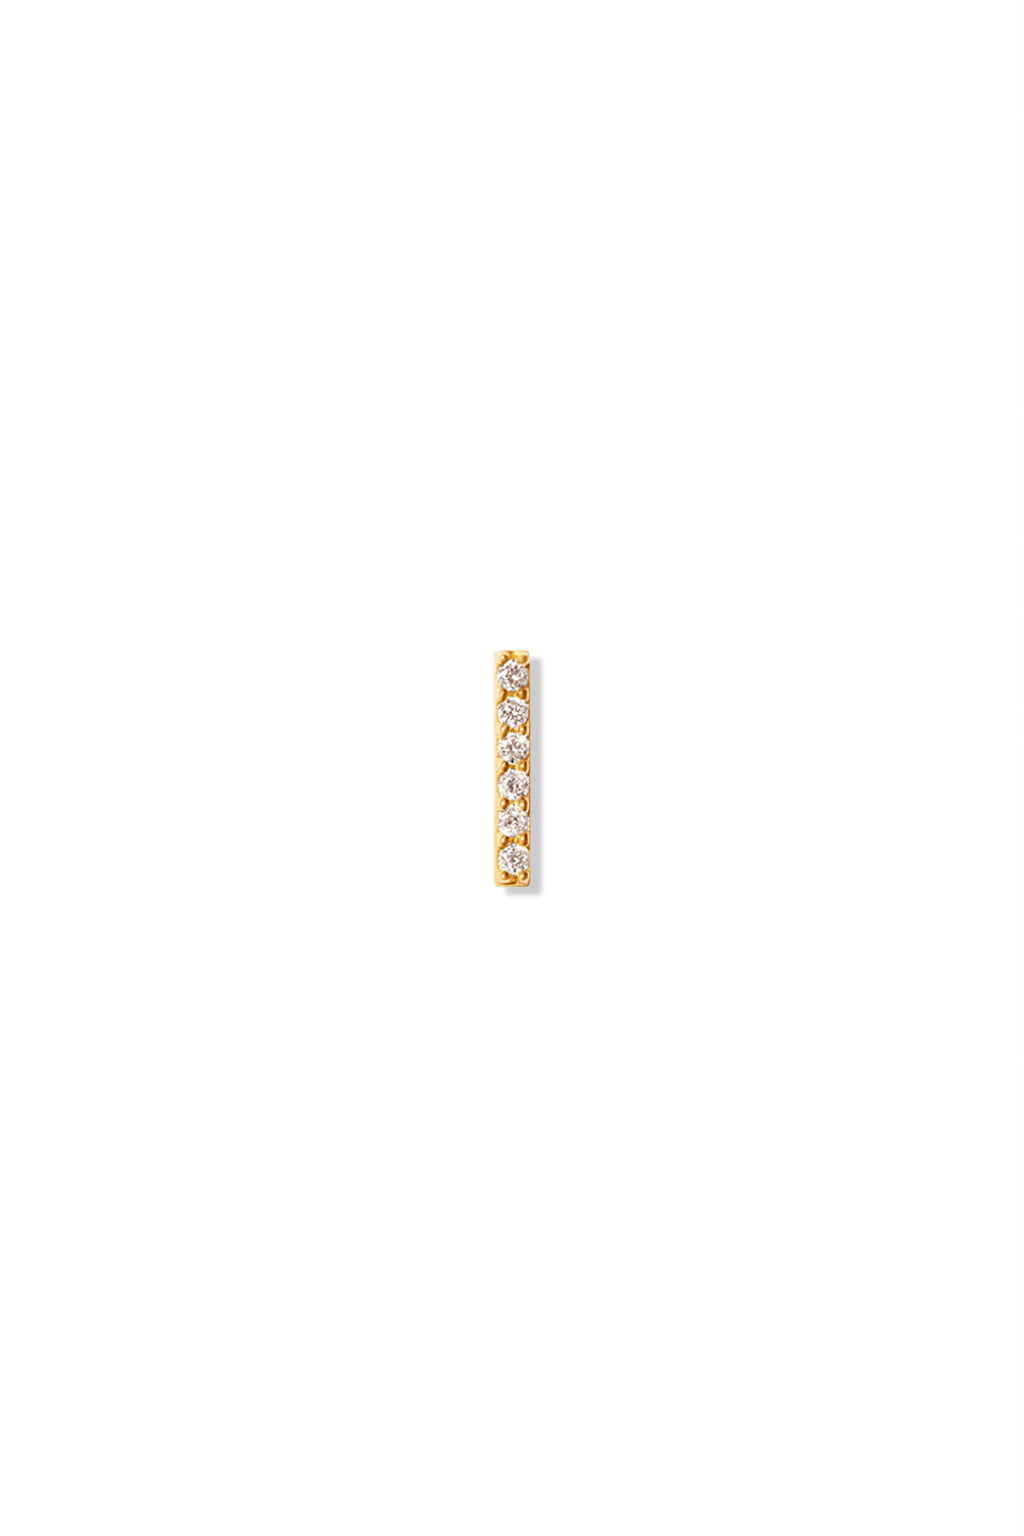 14k yellow gold bar stud with several attached cruelty-free pave circle diamonds.